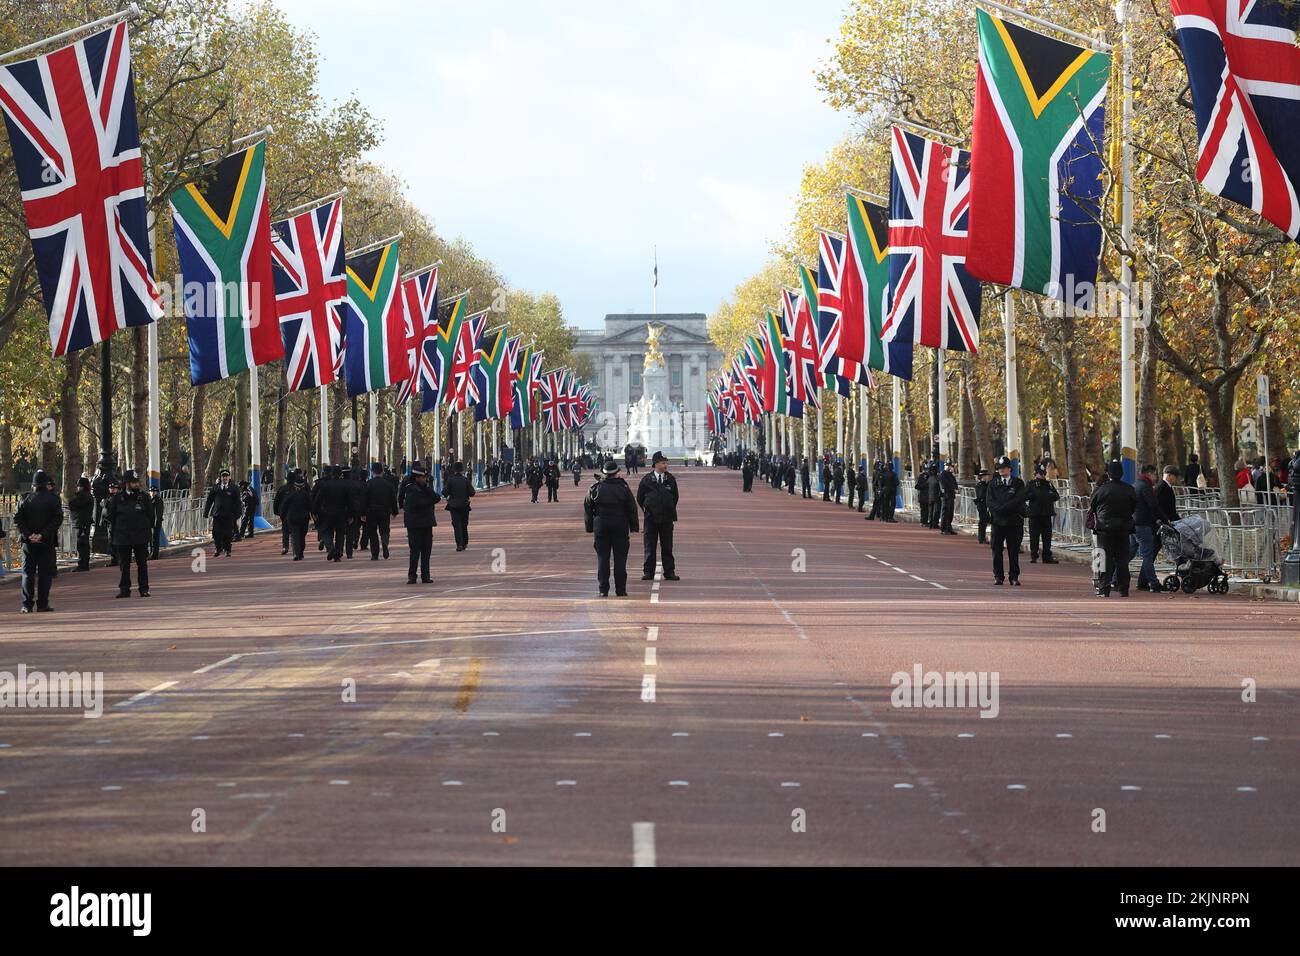 London, UK. 22nd November 2022. Pageant on The Mall for the State Visit hosted by King Charles for South African President Cyril Ramaphosa. The Mall is decorated with British and South African flags amidst heightened security. Stock Photo